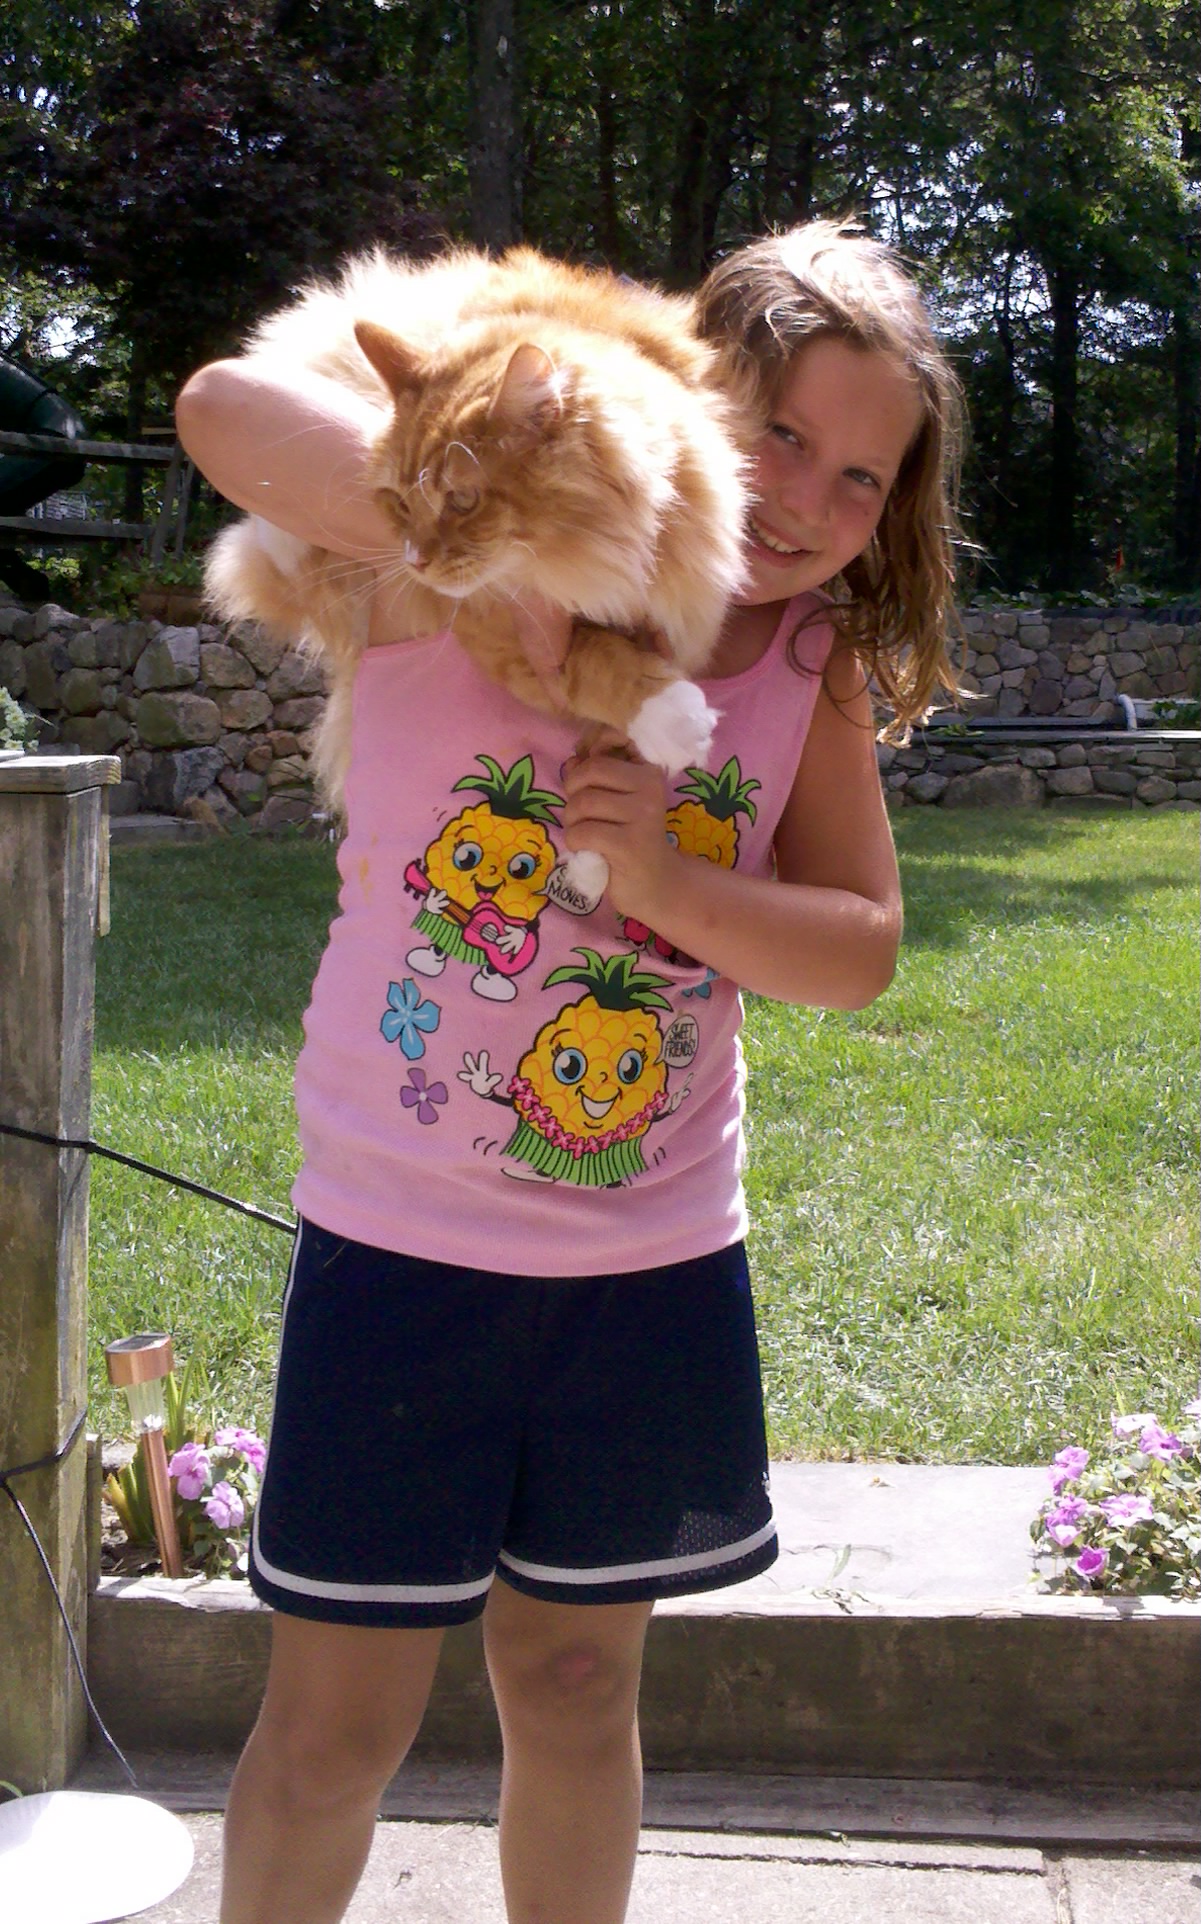 Courtney with "Fred" our 22 pound 18 month old Maine Coon Cat